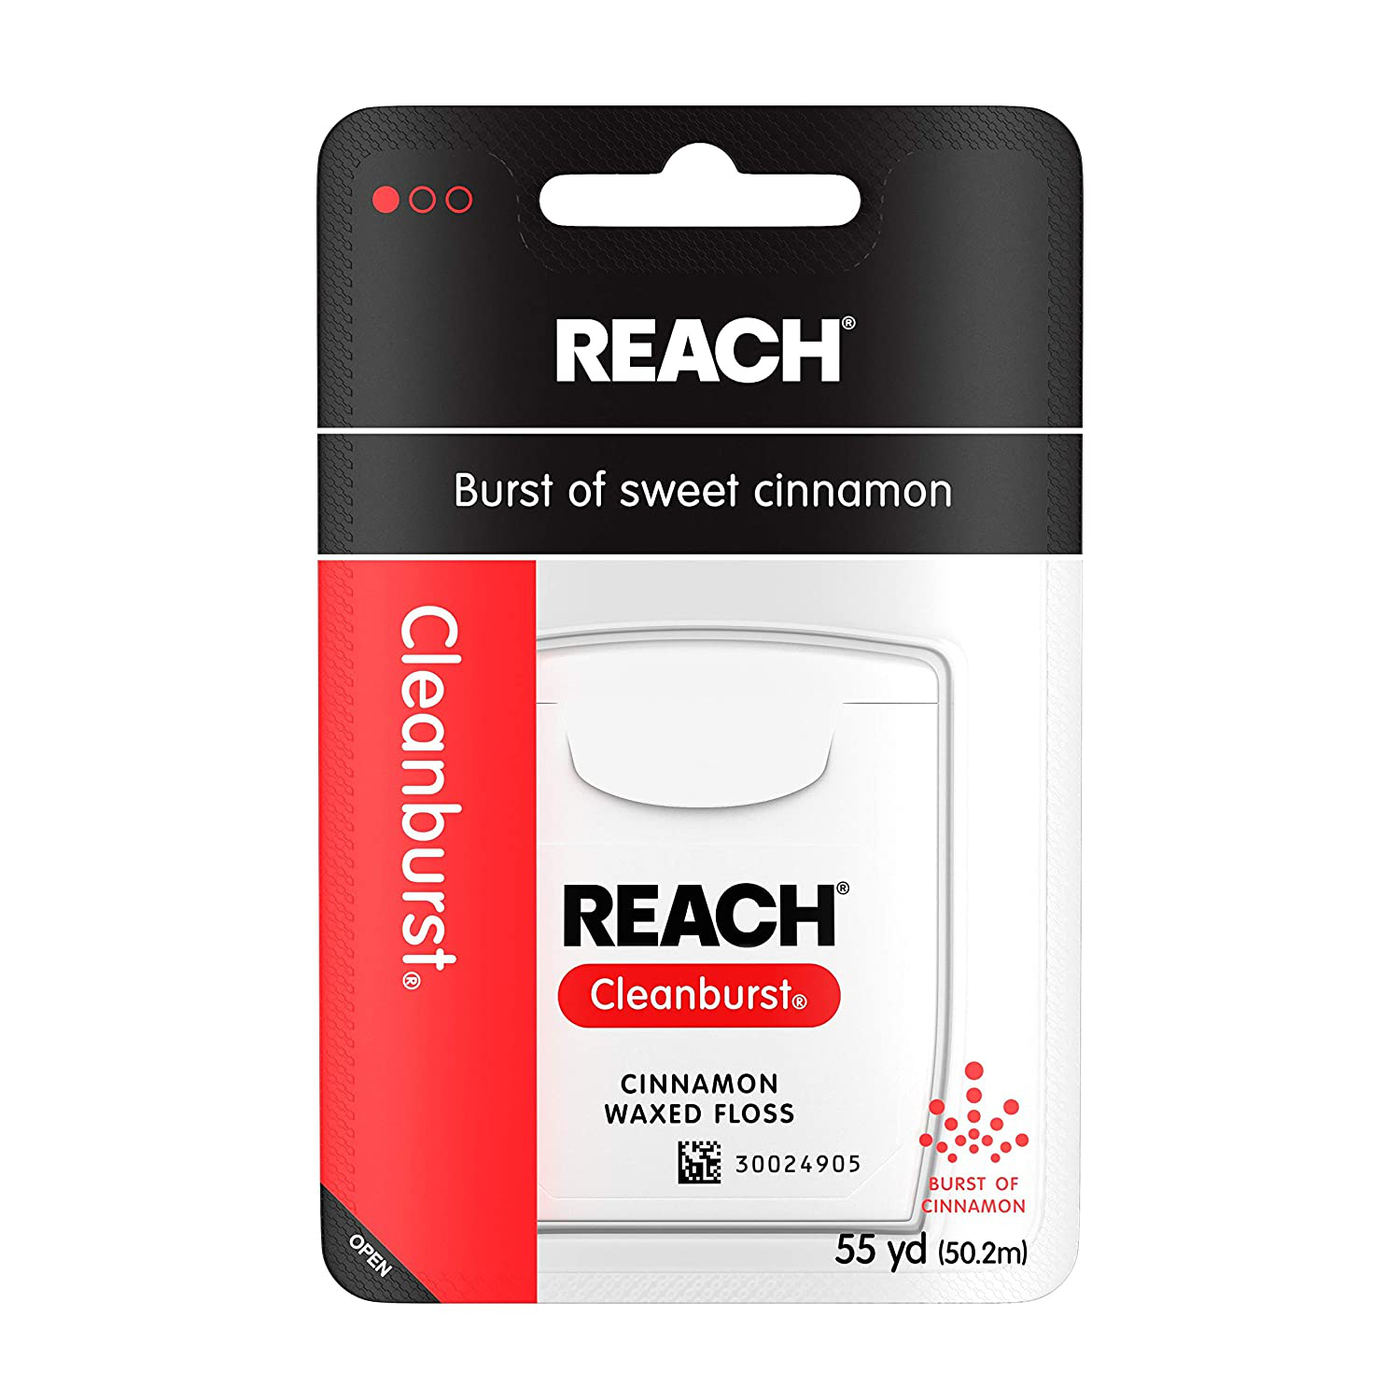 Reach Cleanburst Waxed Dental Floss, Oral Care, Cinnamon Flavored, 55 Yards (Pack of 6)